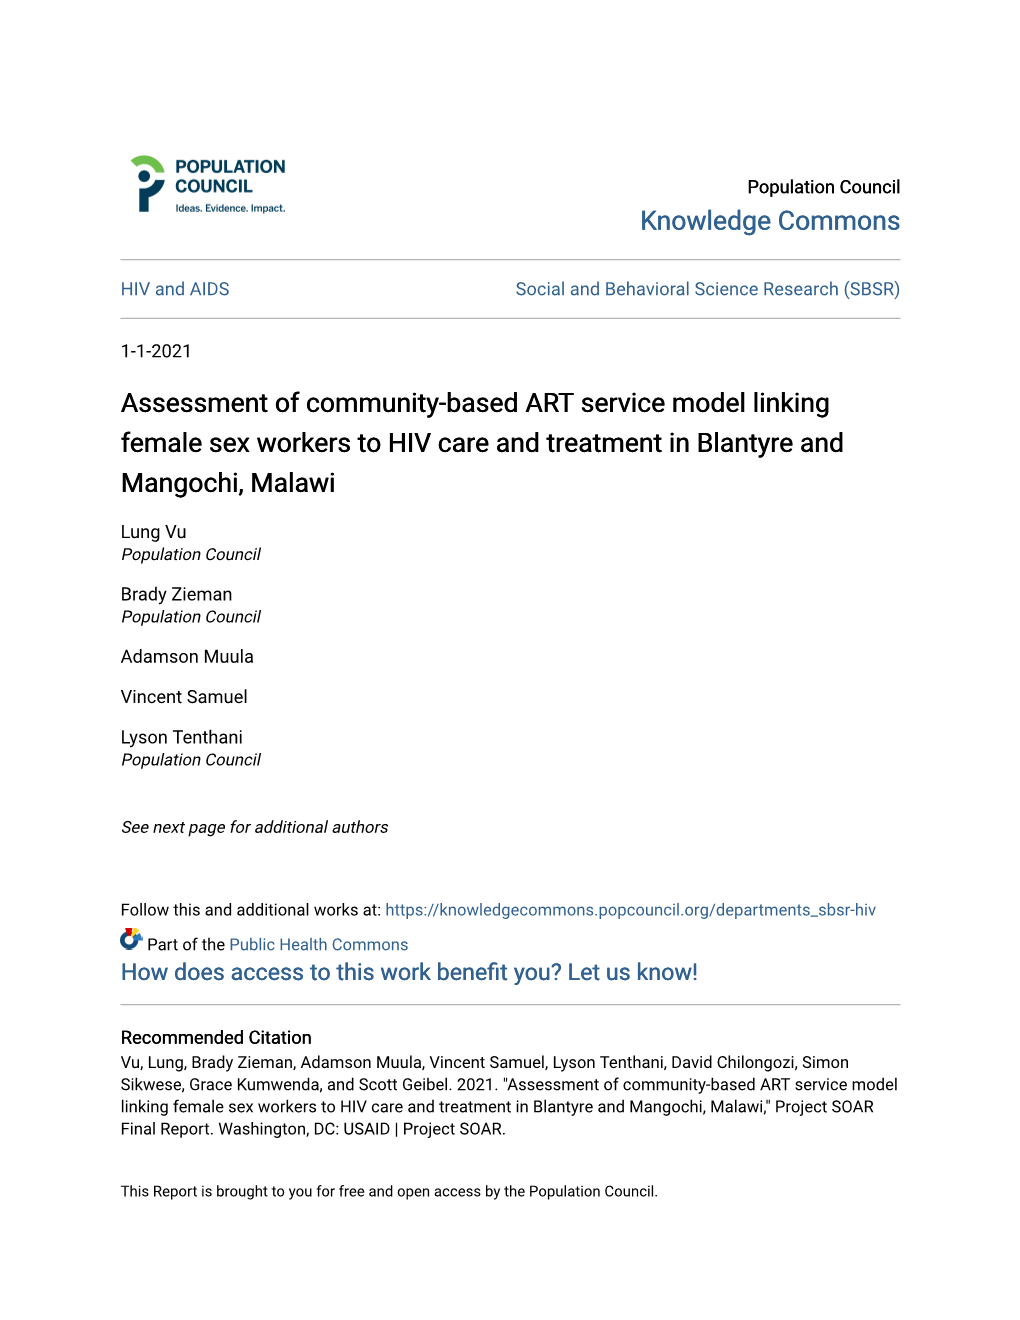 Assessment of Community-Based ART Service Model Linking Female Sex Workers to HIV Care and Treatment in Blantyre and Mangochi, Malawi